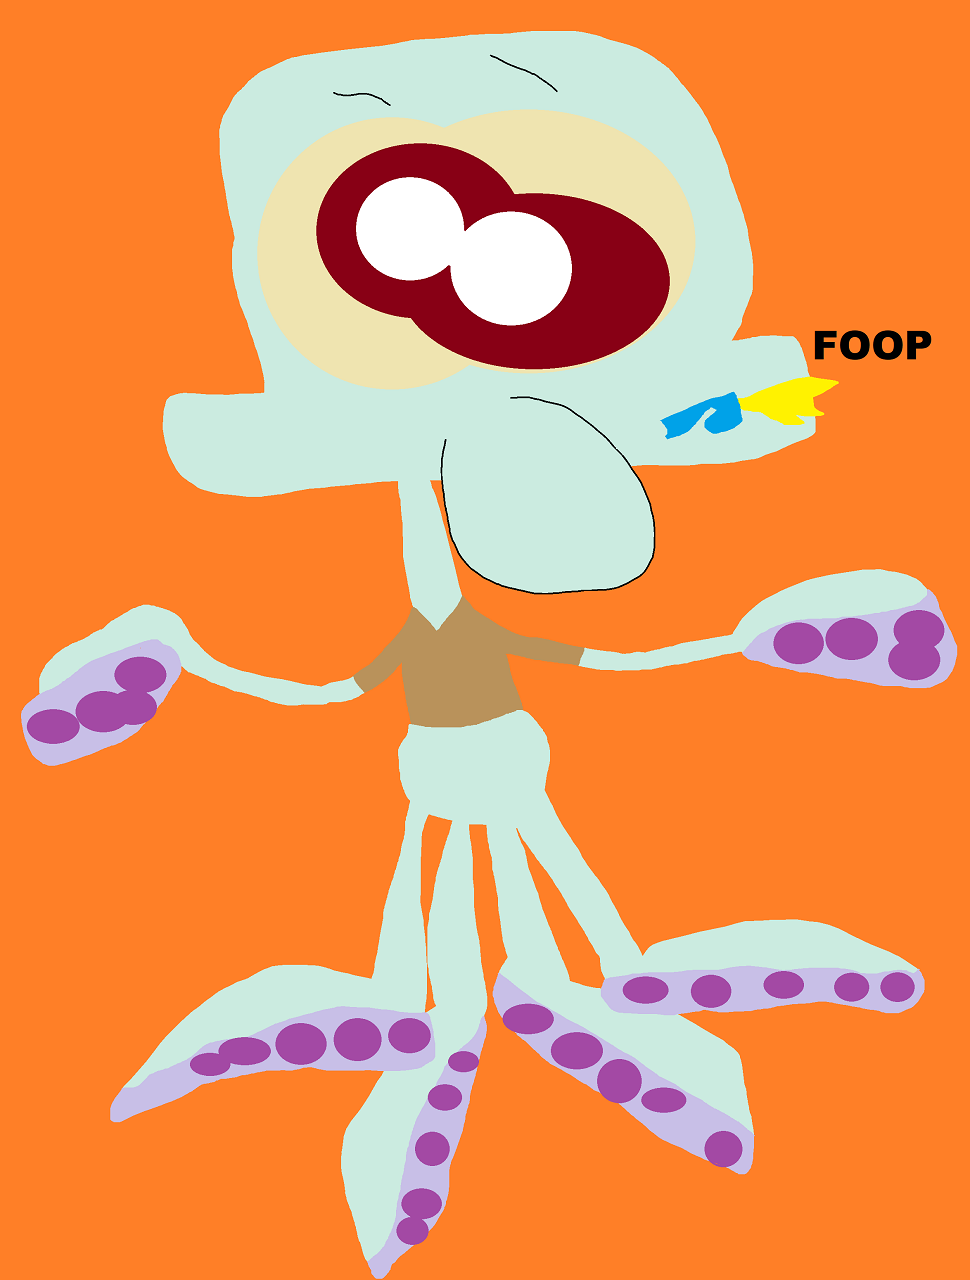 Squidward Gooes FOOP For New Years Eve by Falconlobo